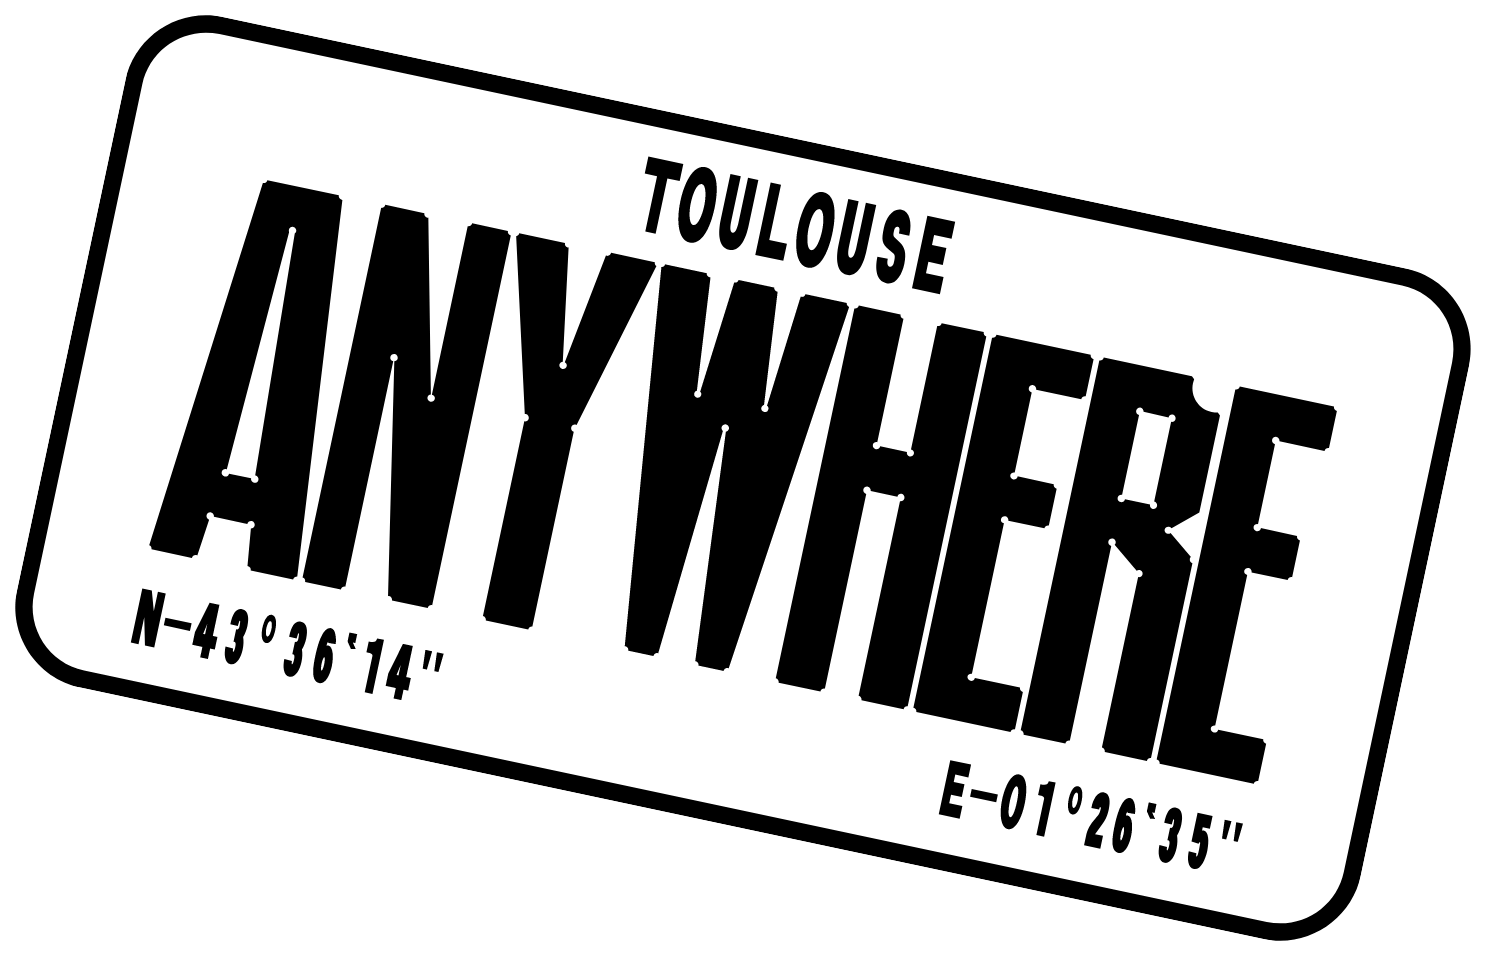 Anywhere Toulouse